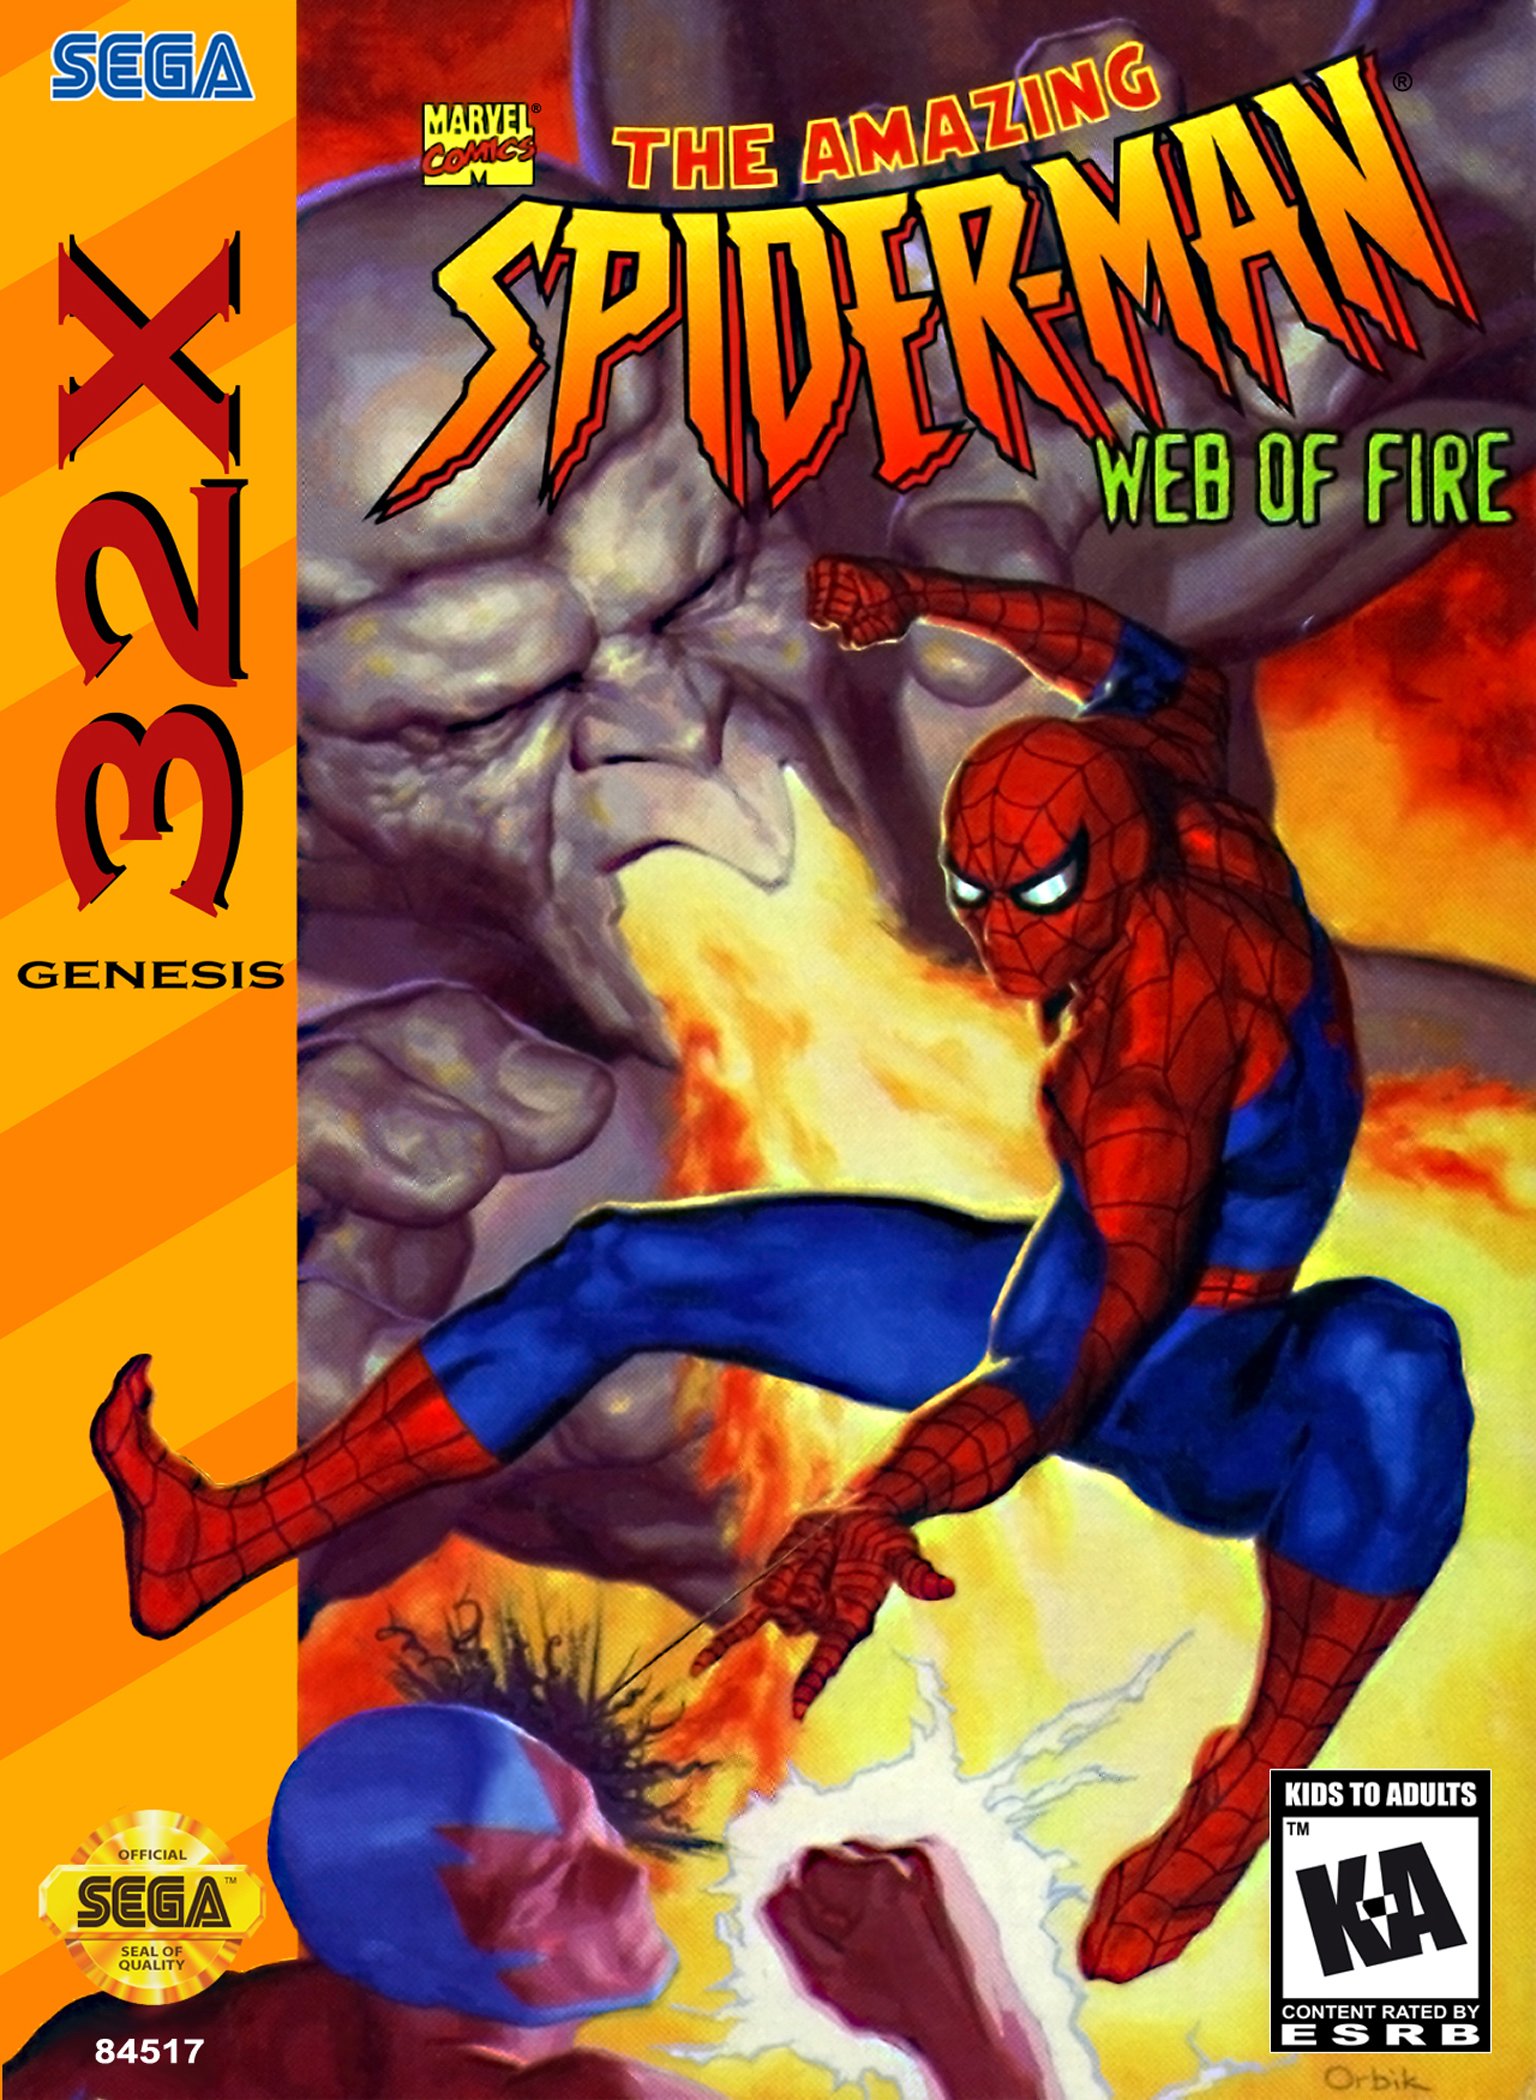 Image of The Amazing Spider-Man: Web of Fire